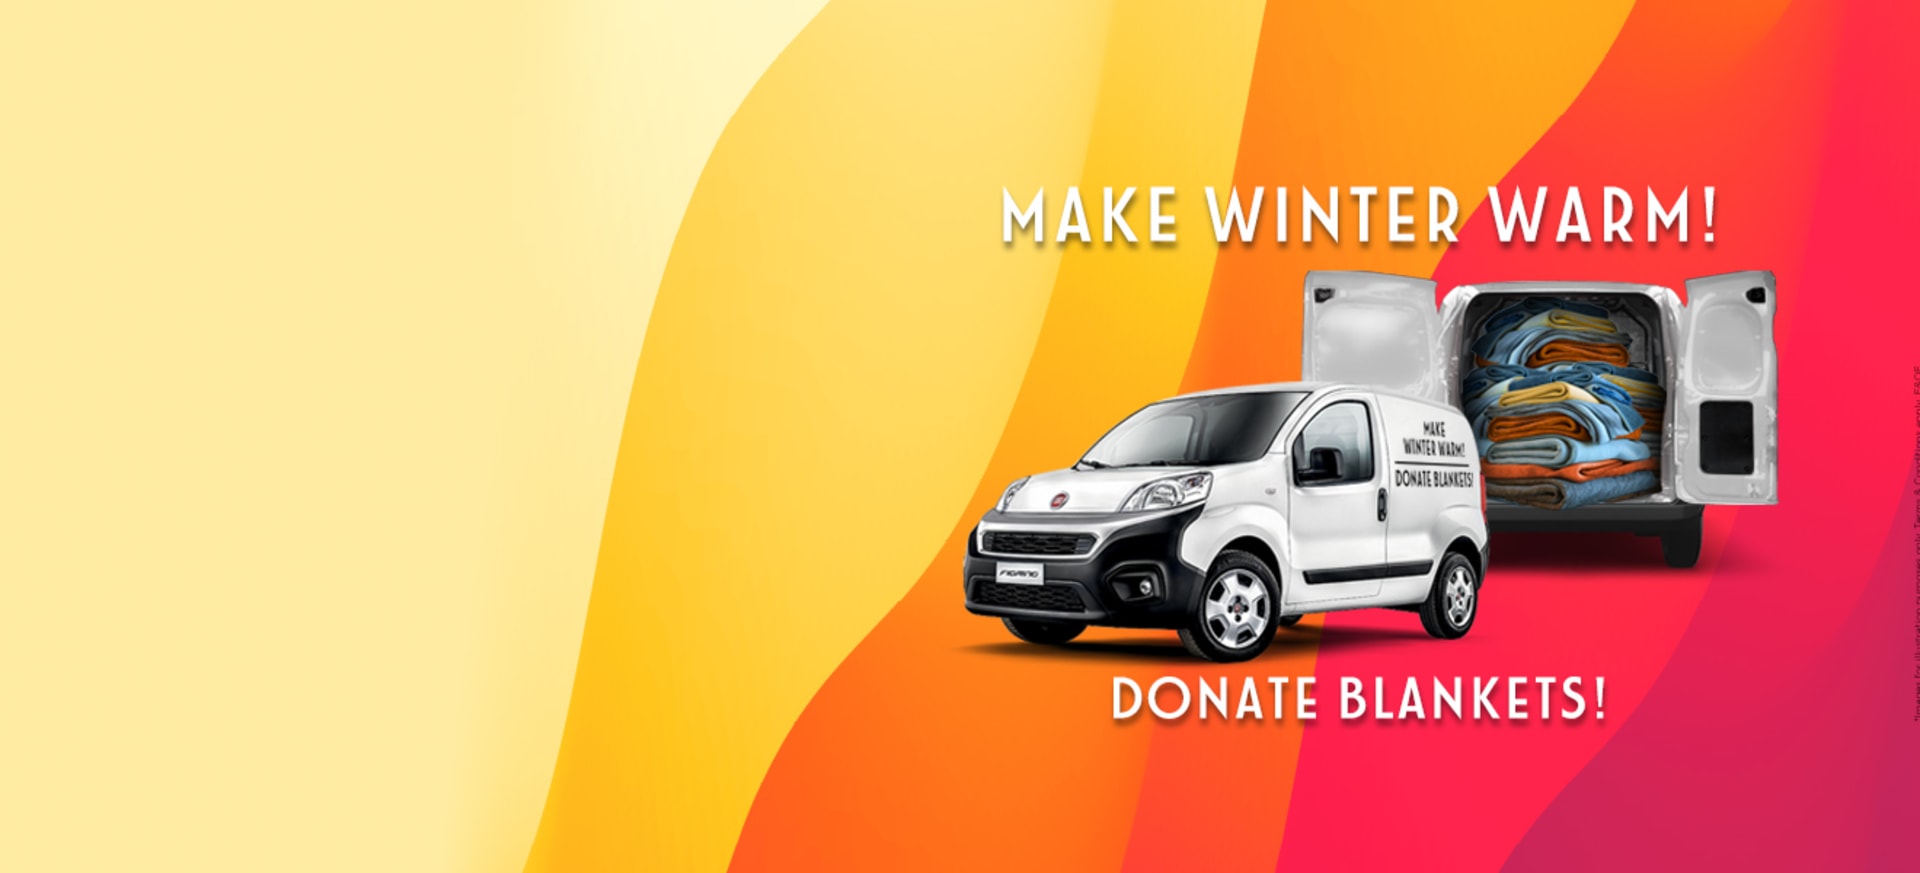 FIAT Winter Blanket Drive CFAO Mobility 